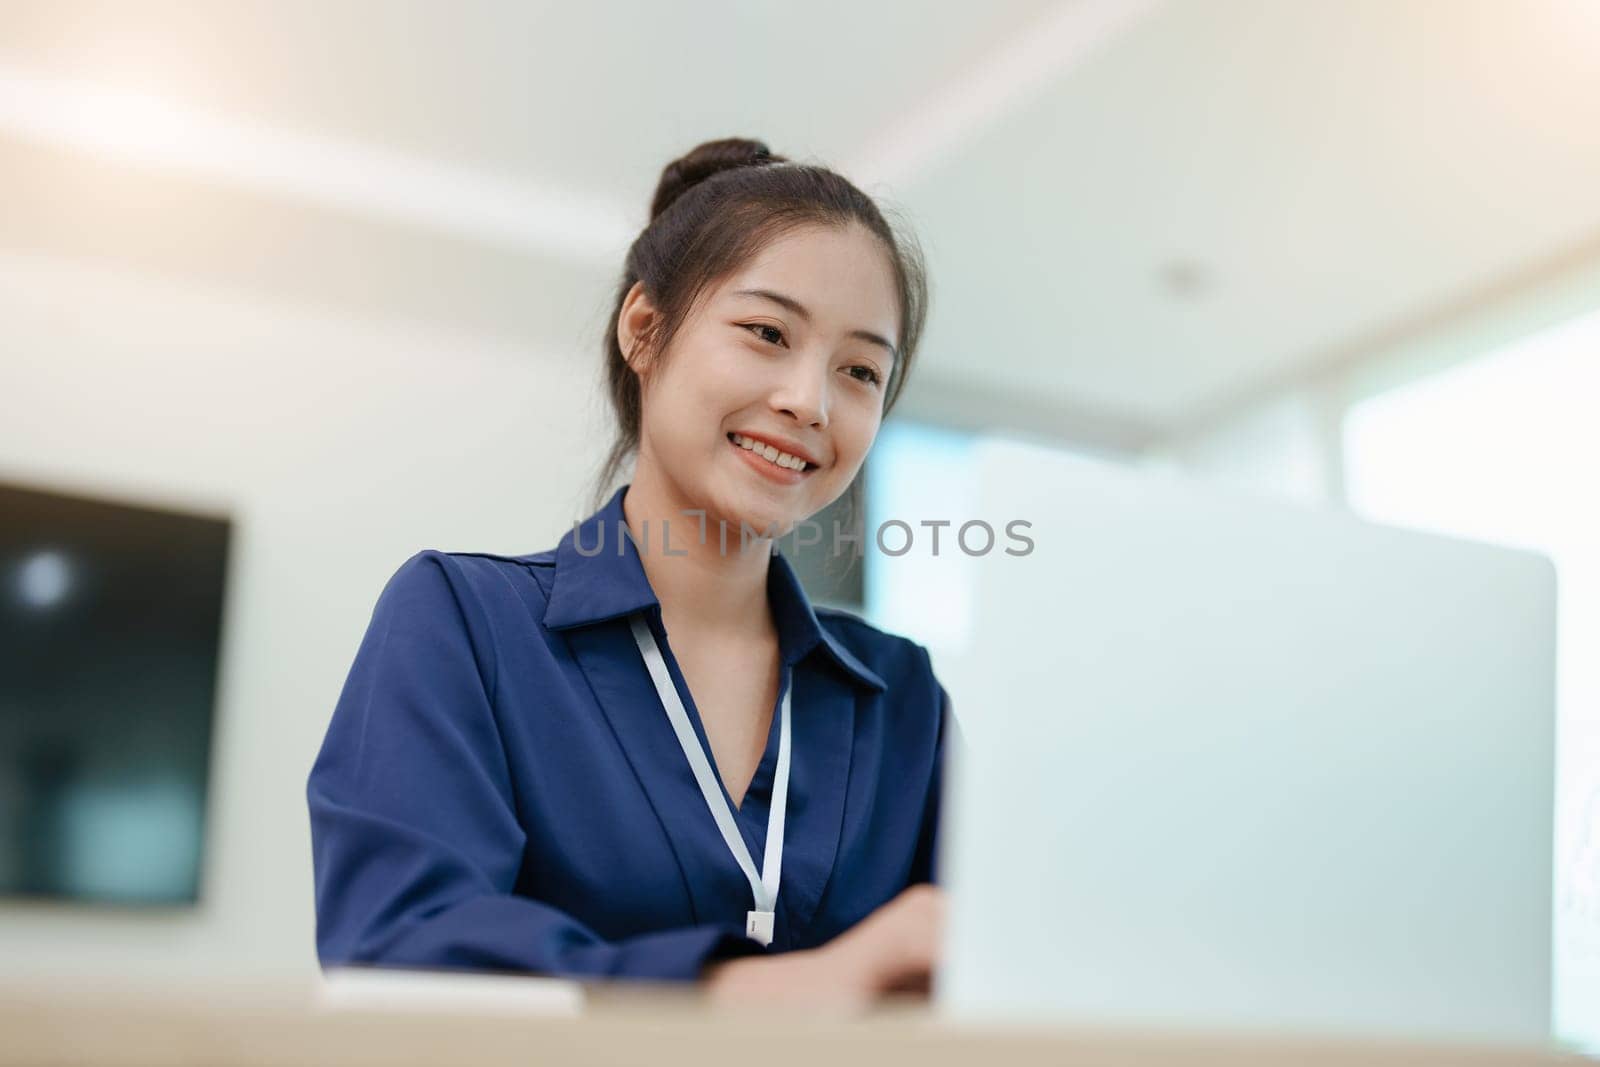 Young asian female work with financial papers at home count on calculator before paying taxes receipts online, planning budget glad to find chance for economy saving money, audit concepts